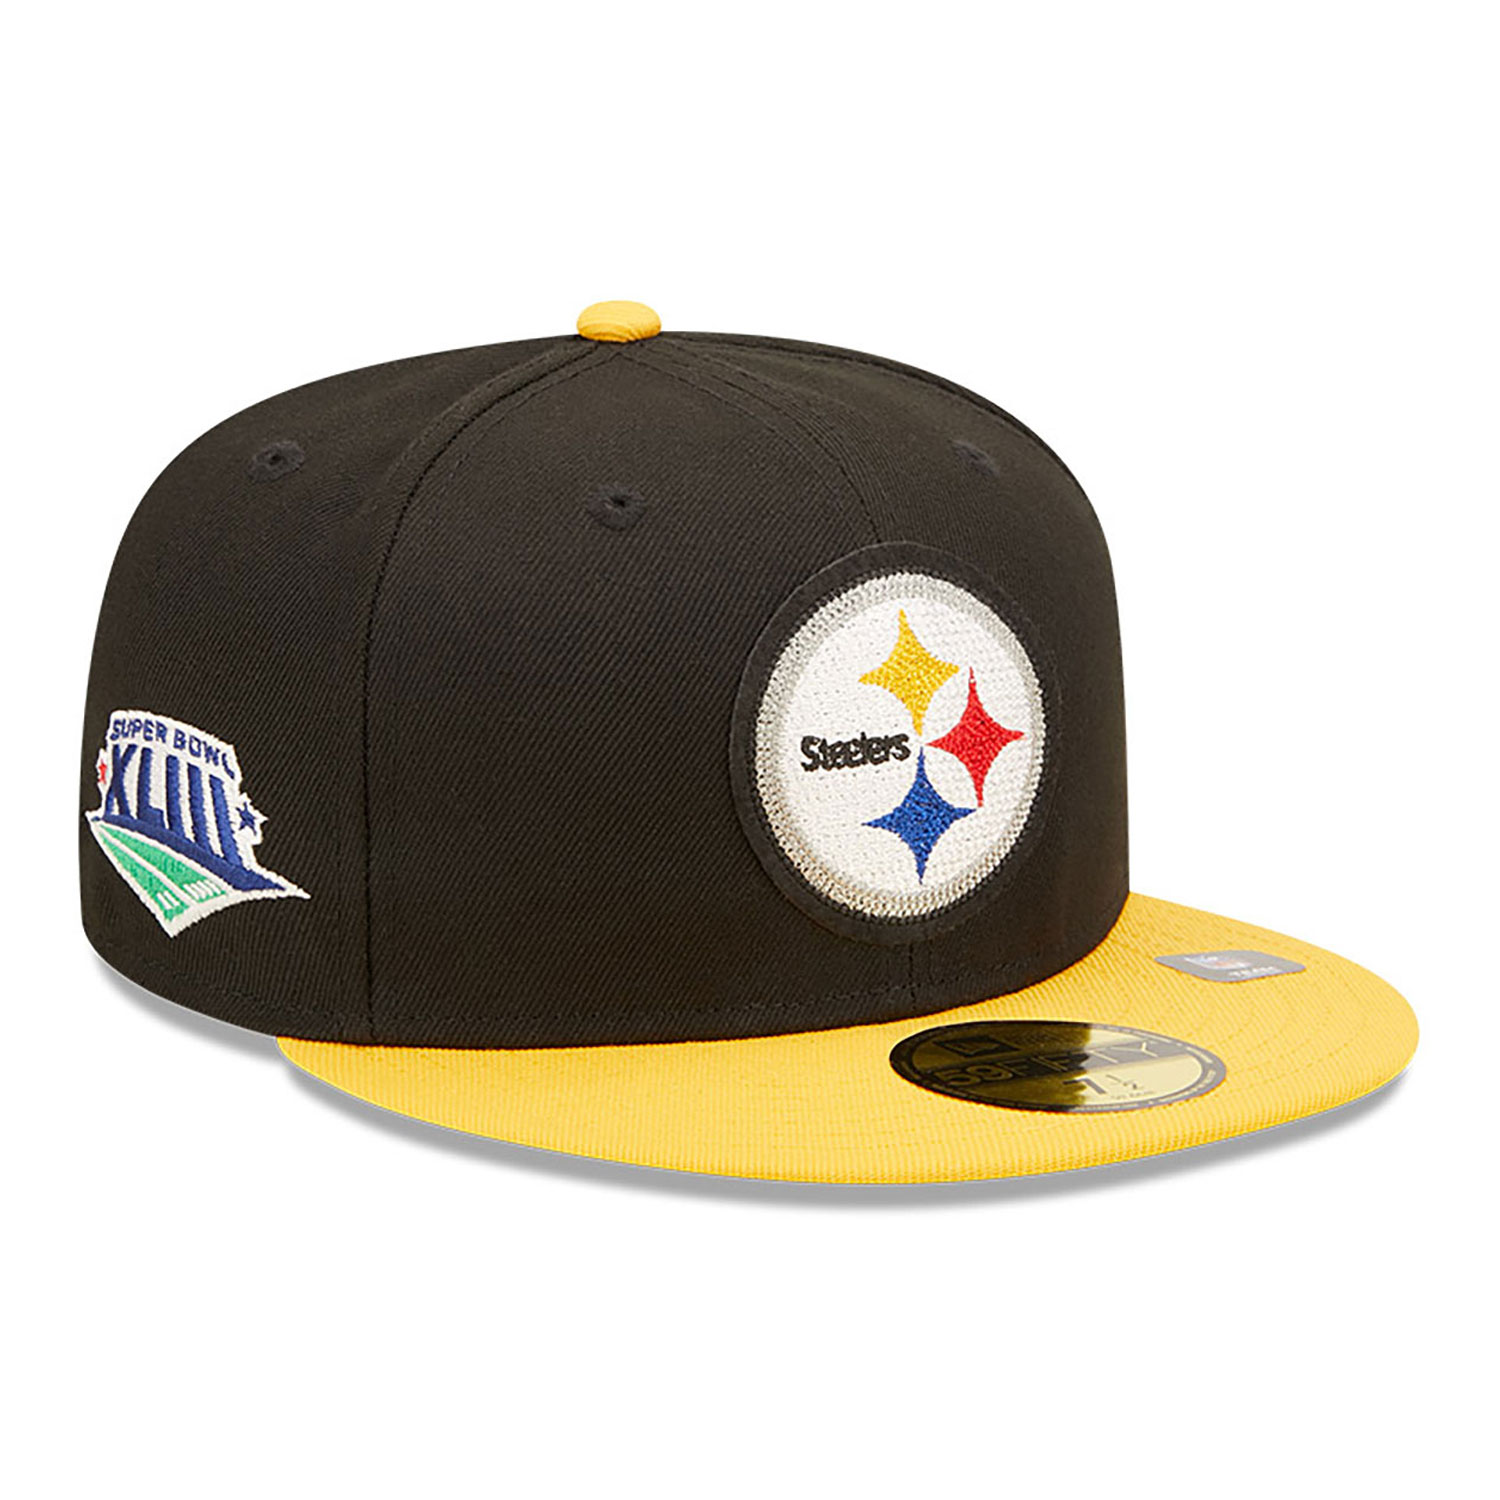 Pittsburgh Steelers NE Letterman Black 59FIFTY Fitted Cap